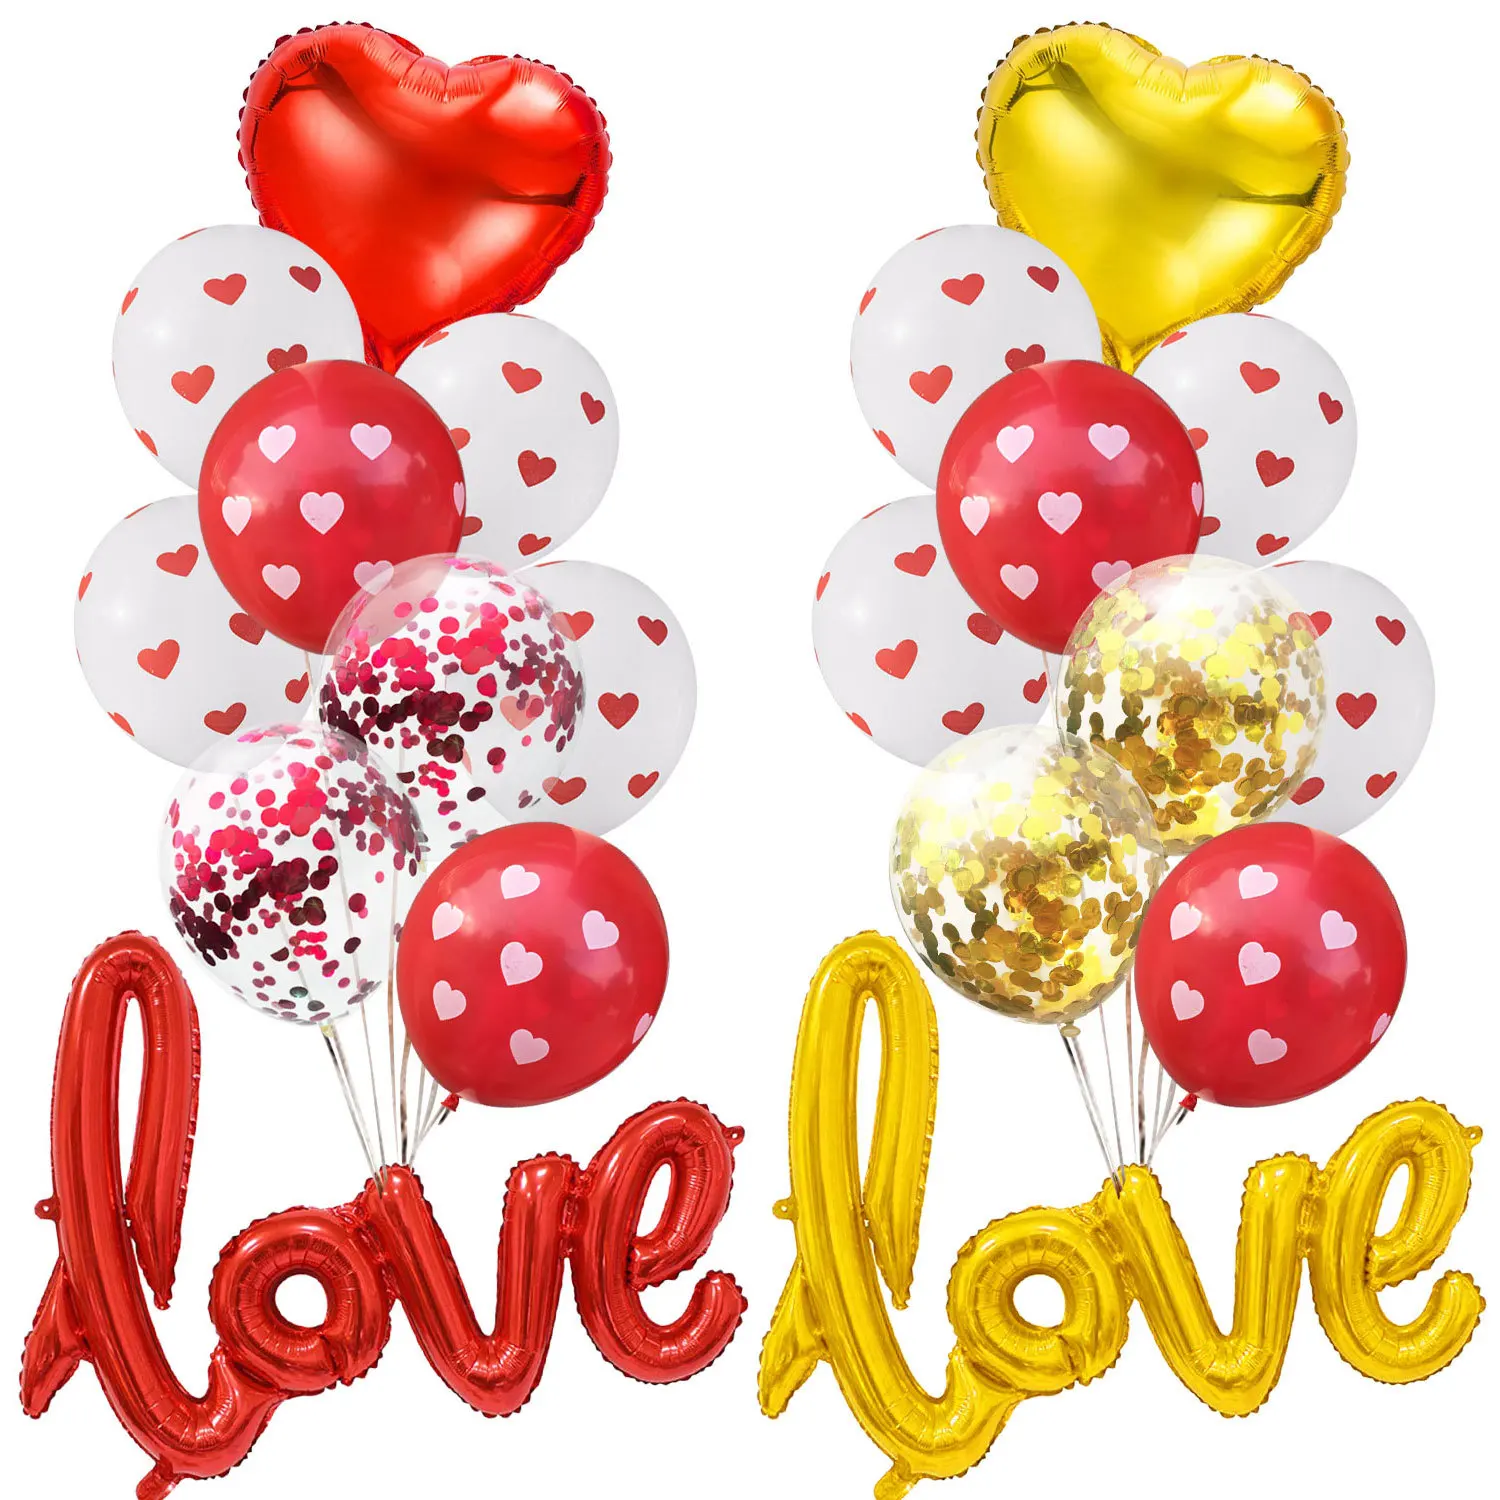 

12pcs Romantic Wedding Love Balloons Set Foil Heart Wedding Ballons Valentine Day Decorations For Party Baloes Red Balls Helium